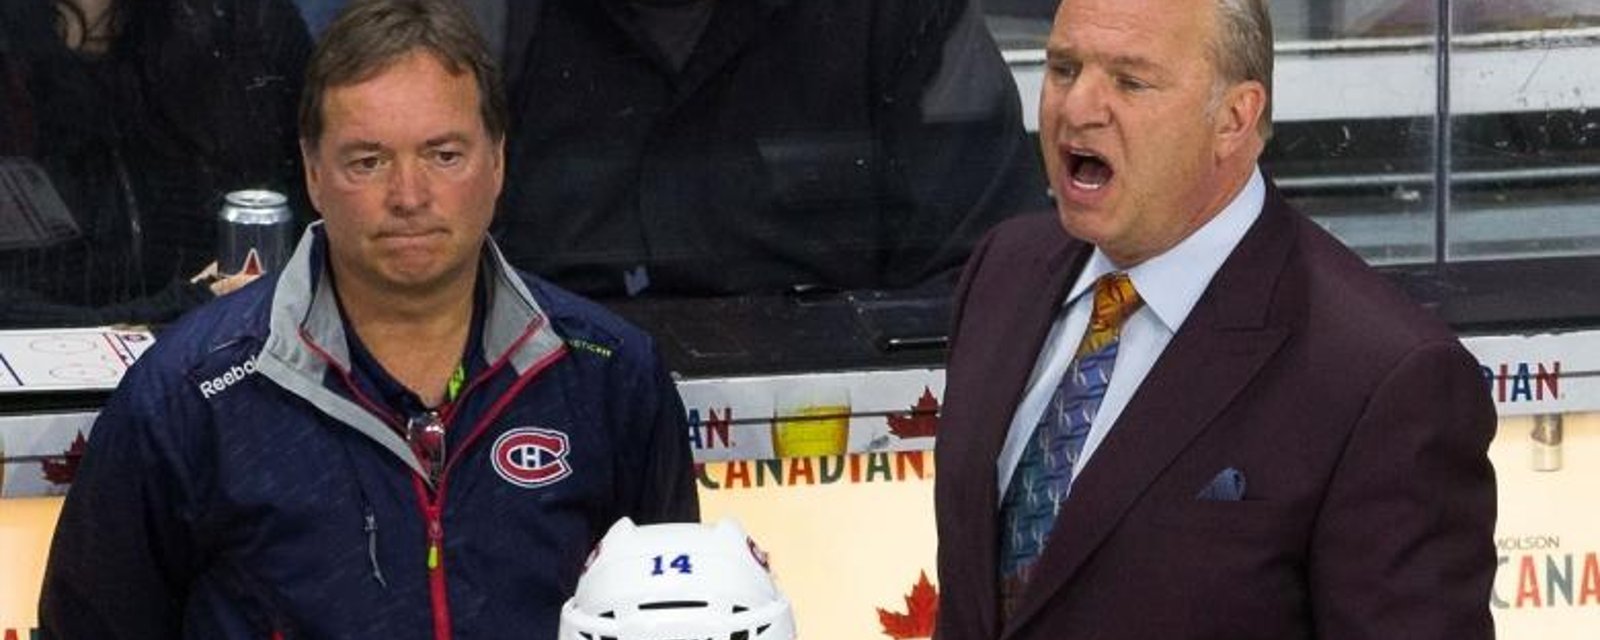 Breaking: Two names already rumored to be the next Canadiens head coach.